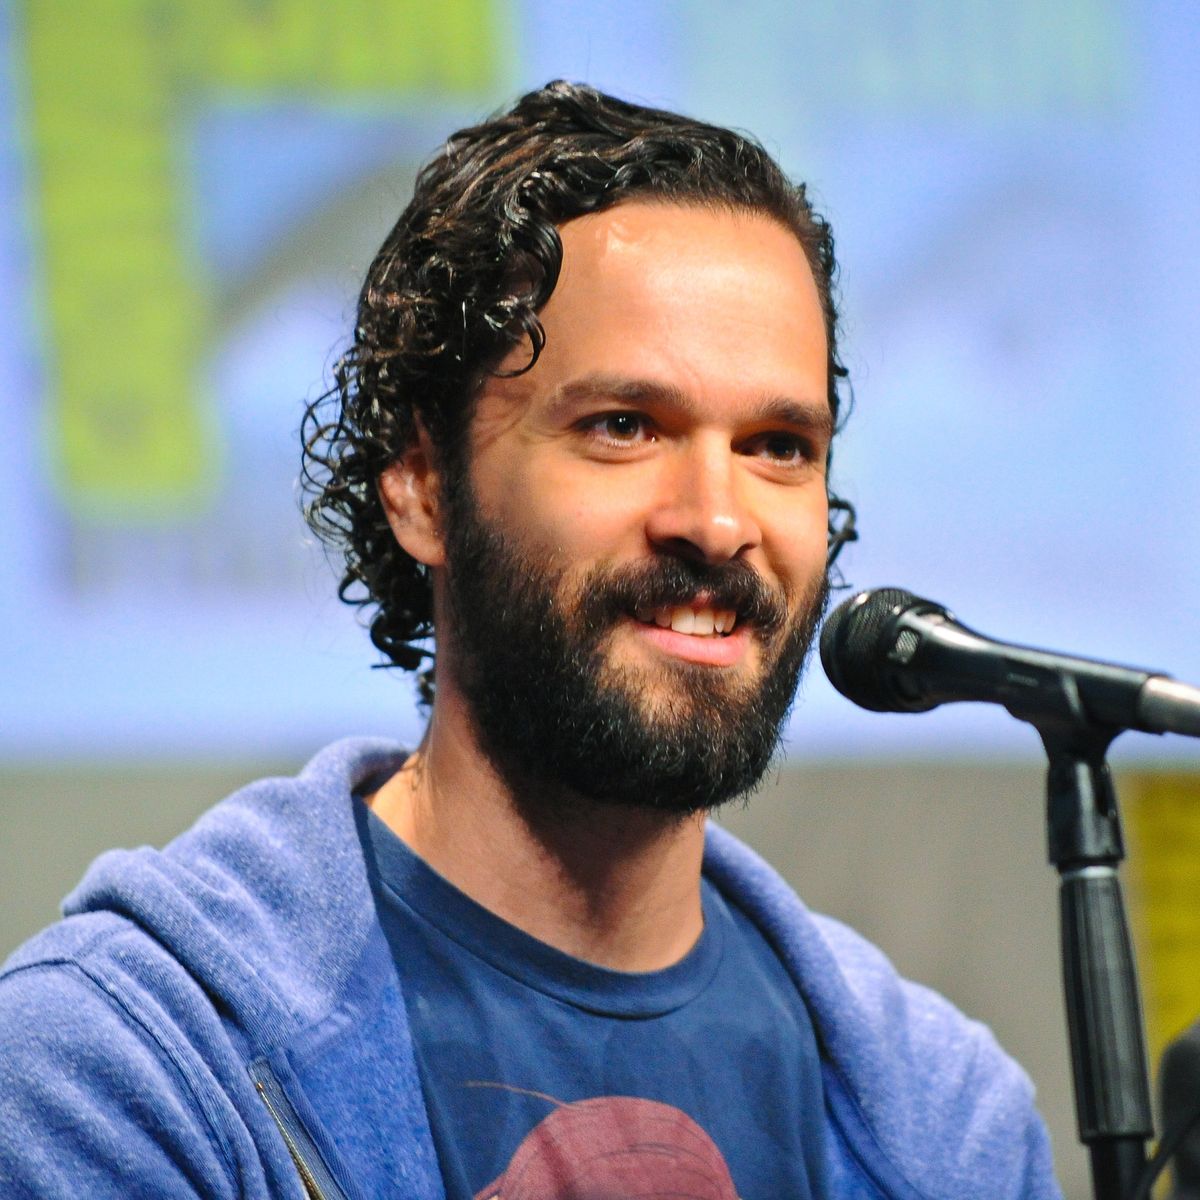 Last of Us' director Neil Druckmann promoted to Vice Pres of Naughty Dog